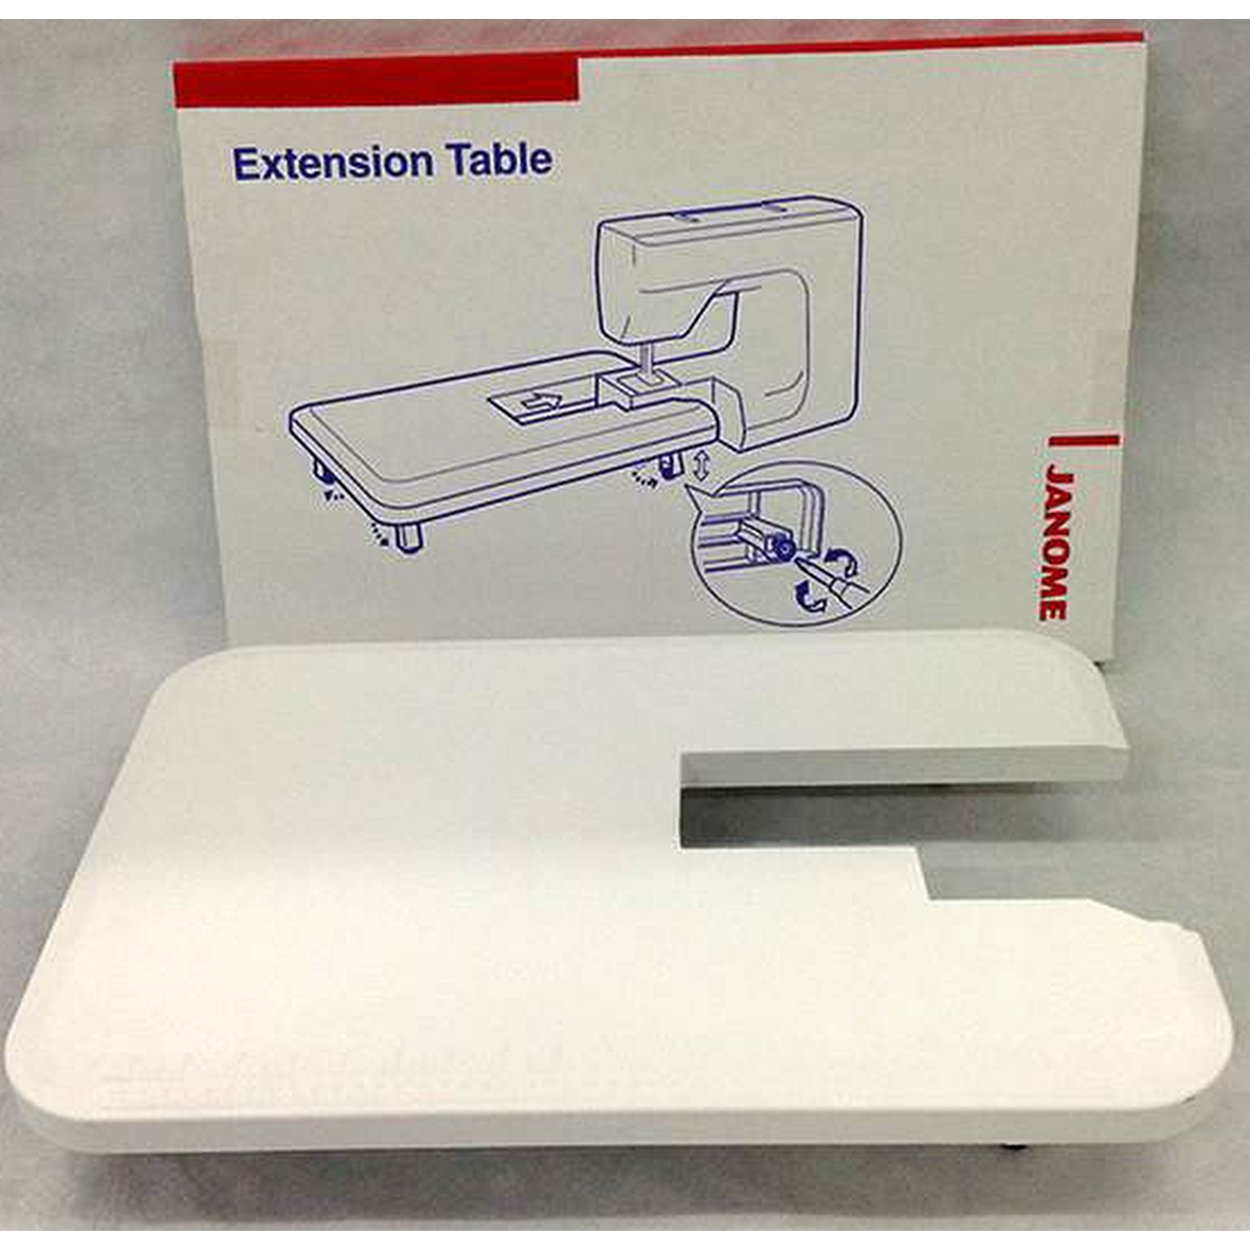 Janome Extension Table - J3 series from Jaycotts Sewing Supplies